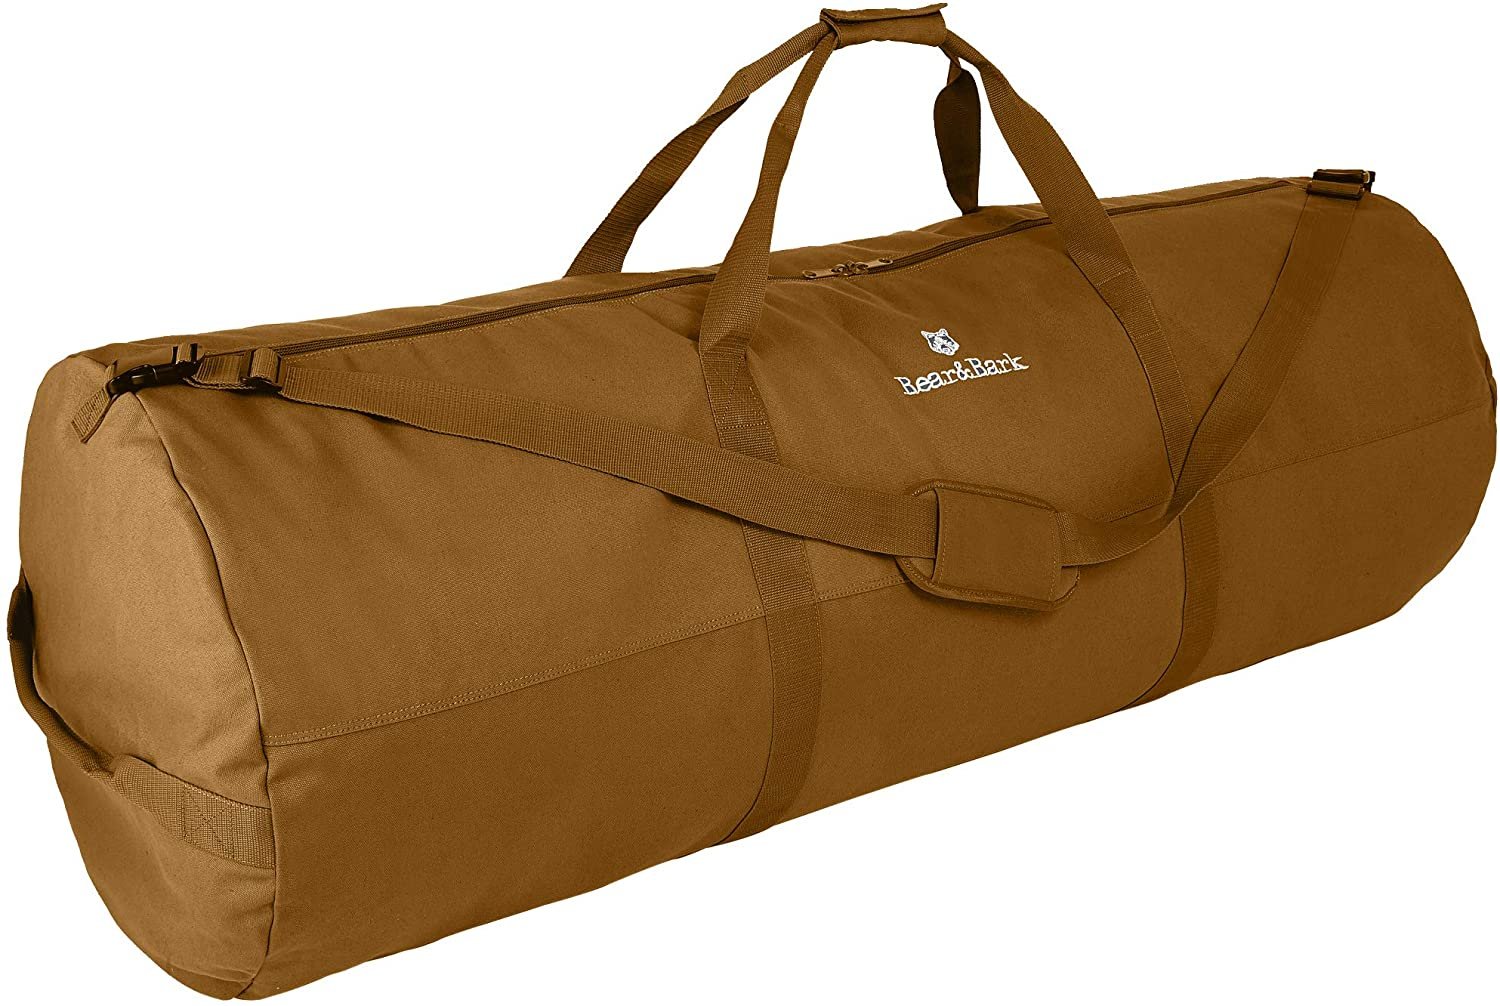 Blue Military Canvas Duffel Bag - Giant 56x22 - Army Style Carryall for Men/Women